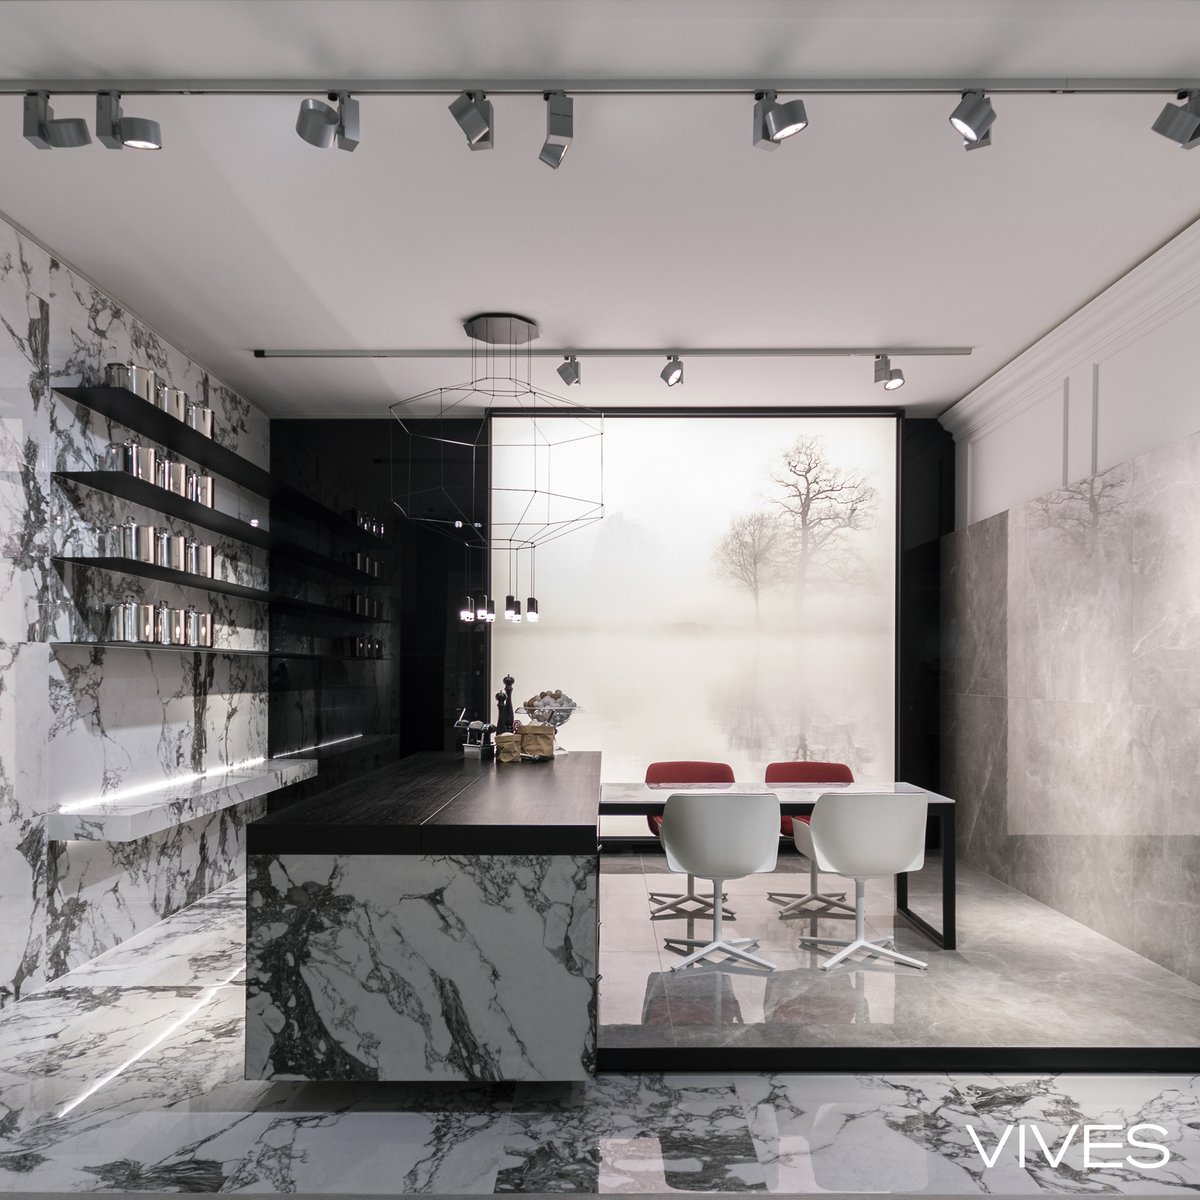 Floors and walls with the elegance and shine of marble with Arue-R Polished porcelain tile, available in three different formats: 59,3X119,3 cm, 119,3X119,3 cm and 79,3X179,3 cm, from the Marblelous collection. ow.ly/1MiE50RcX4w #vives #marble #kitchentiles #kitchedesign